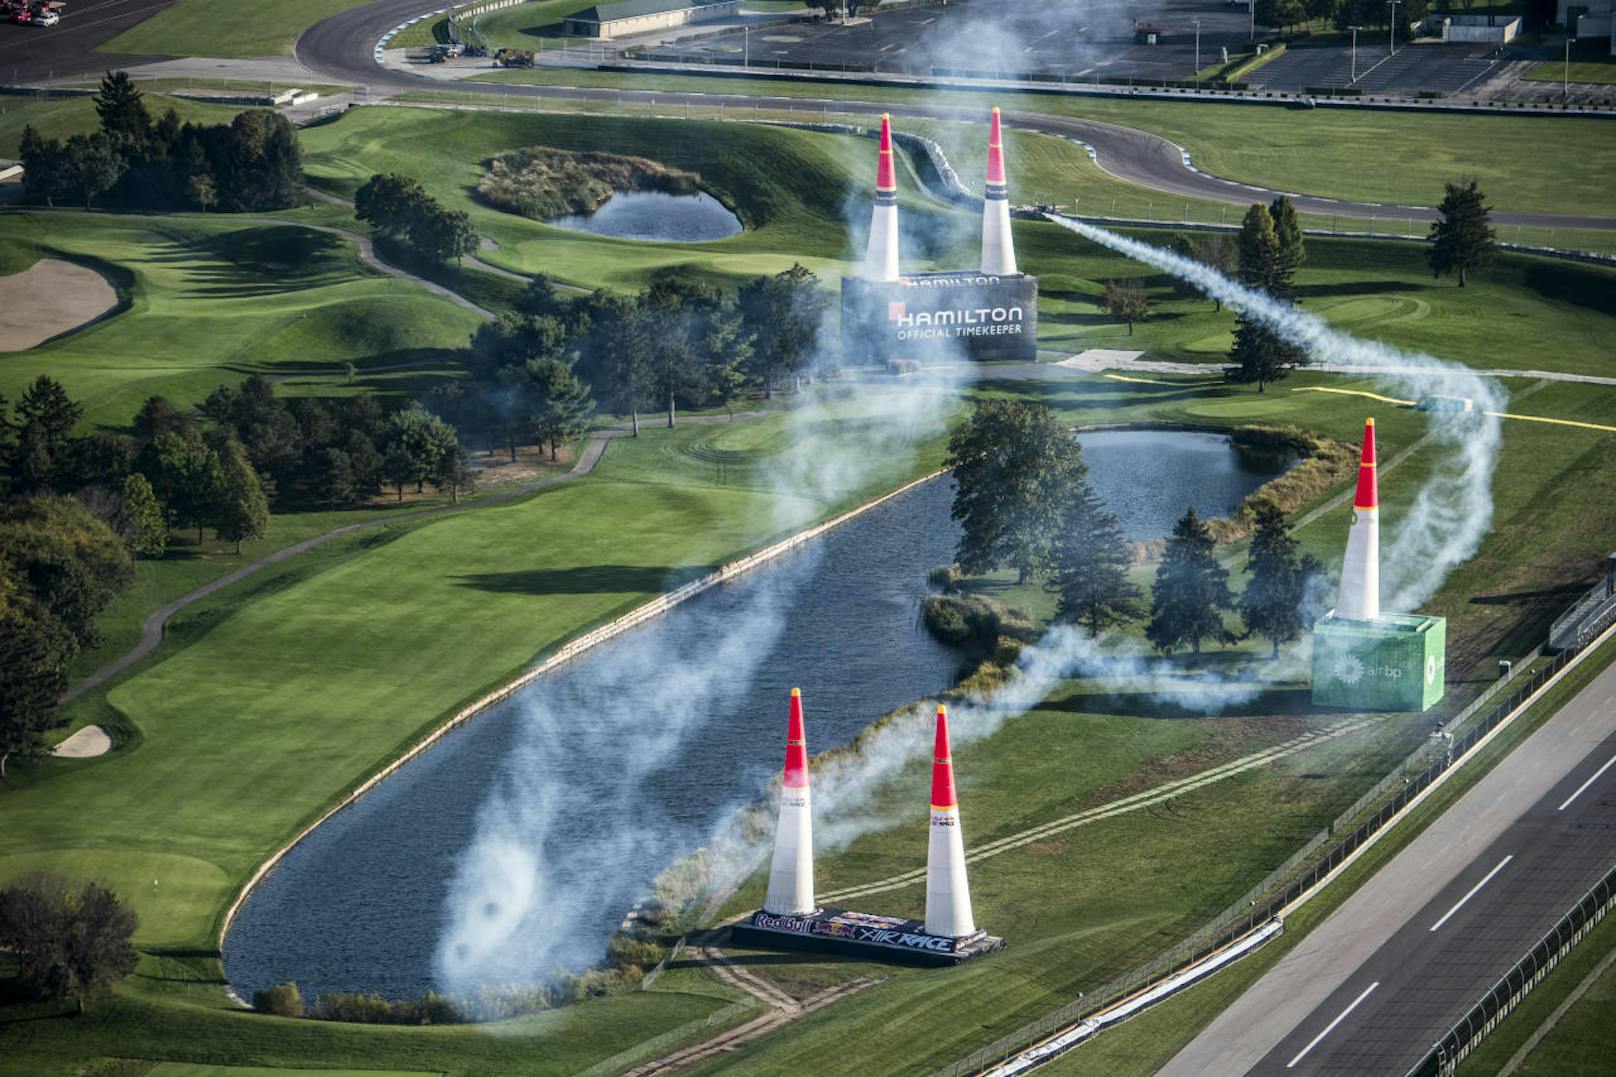 Martin Sonka of the Czech Republic performs during qualifying day at the eighth round of the Red Bull Air Race World Championship at Indianapolis Motor Speedway, United States on October 14, 2017. // Predrag Vuckovic/Red Bull Content Pool // AP-1THJRWRAS1W11 // Usage for editorial use only // Please go to www.redbullcontentpool.com for further information. // Predrag Vuckovic/Red Bull Content Pool